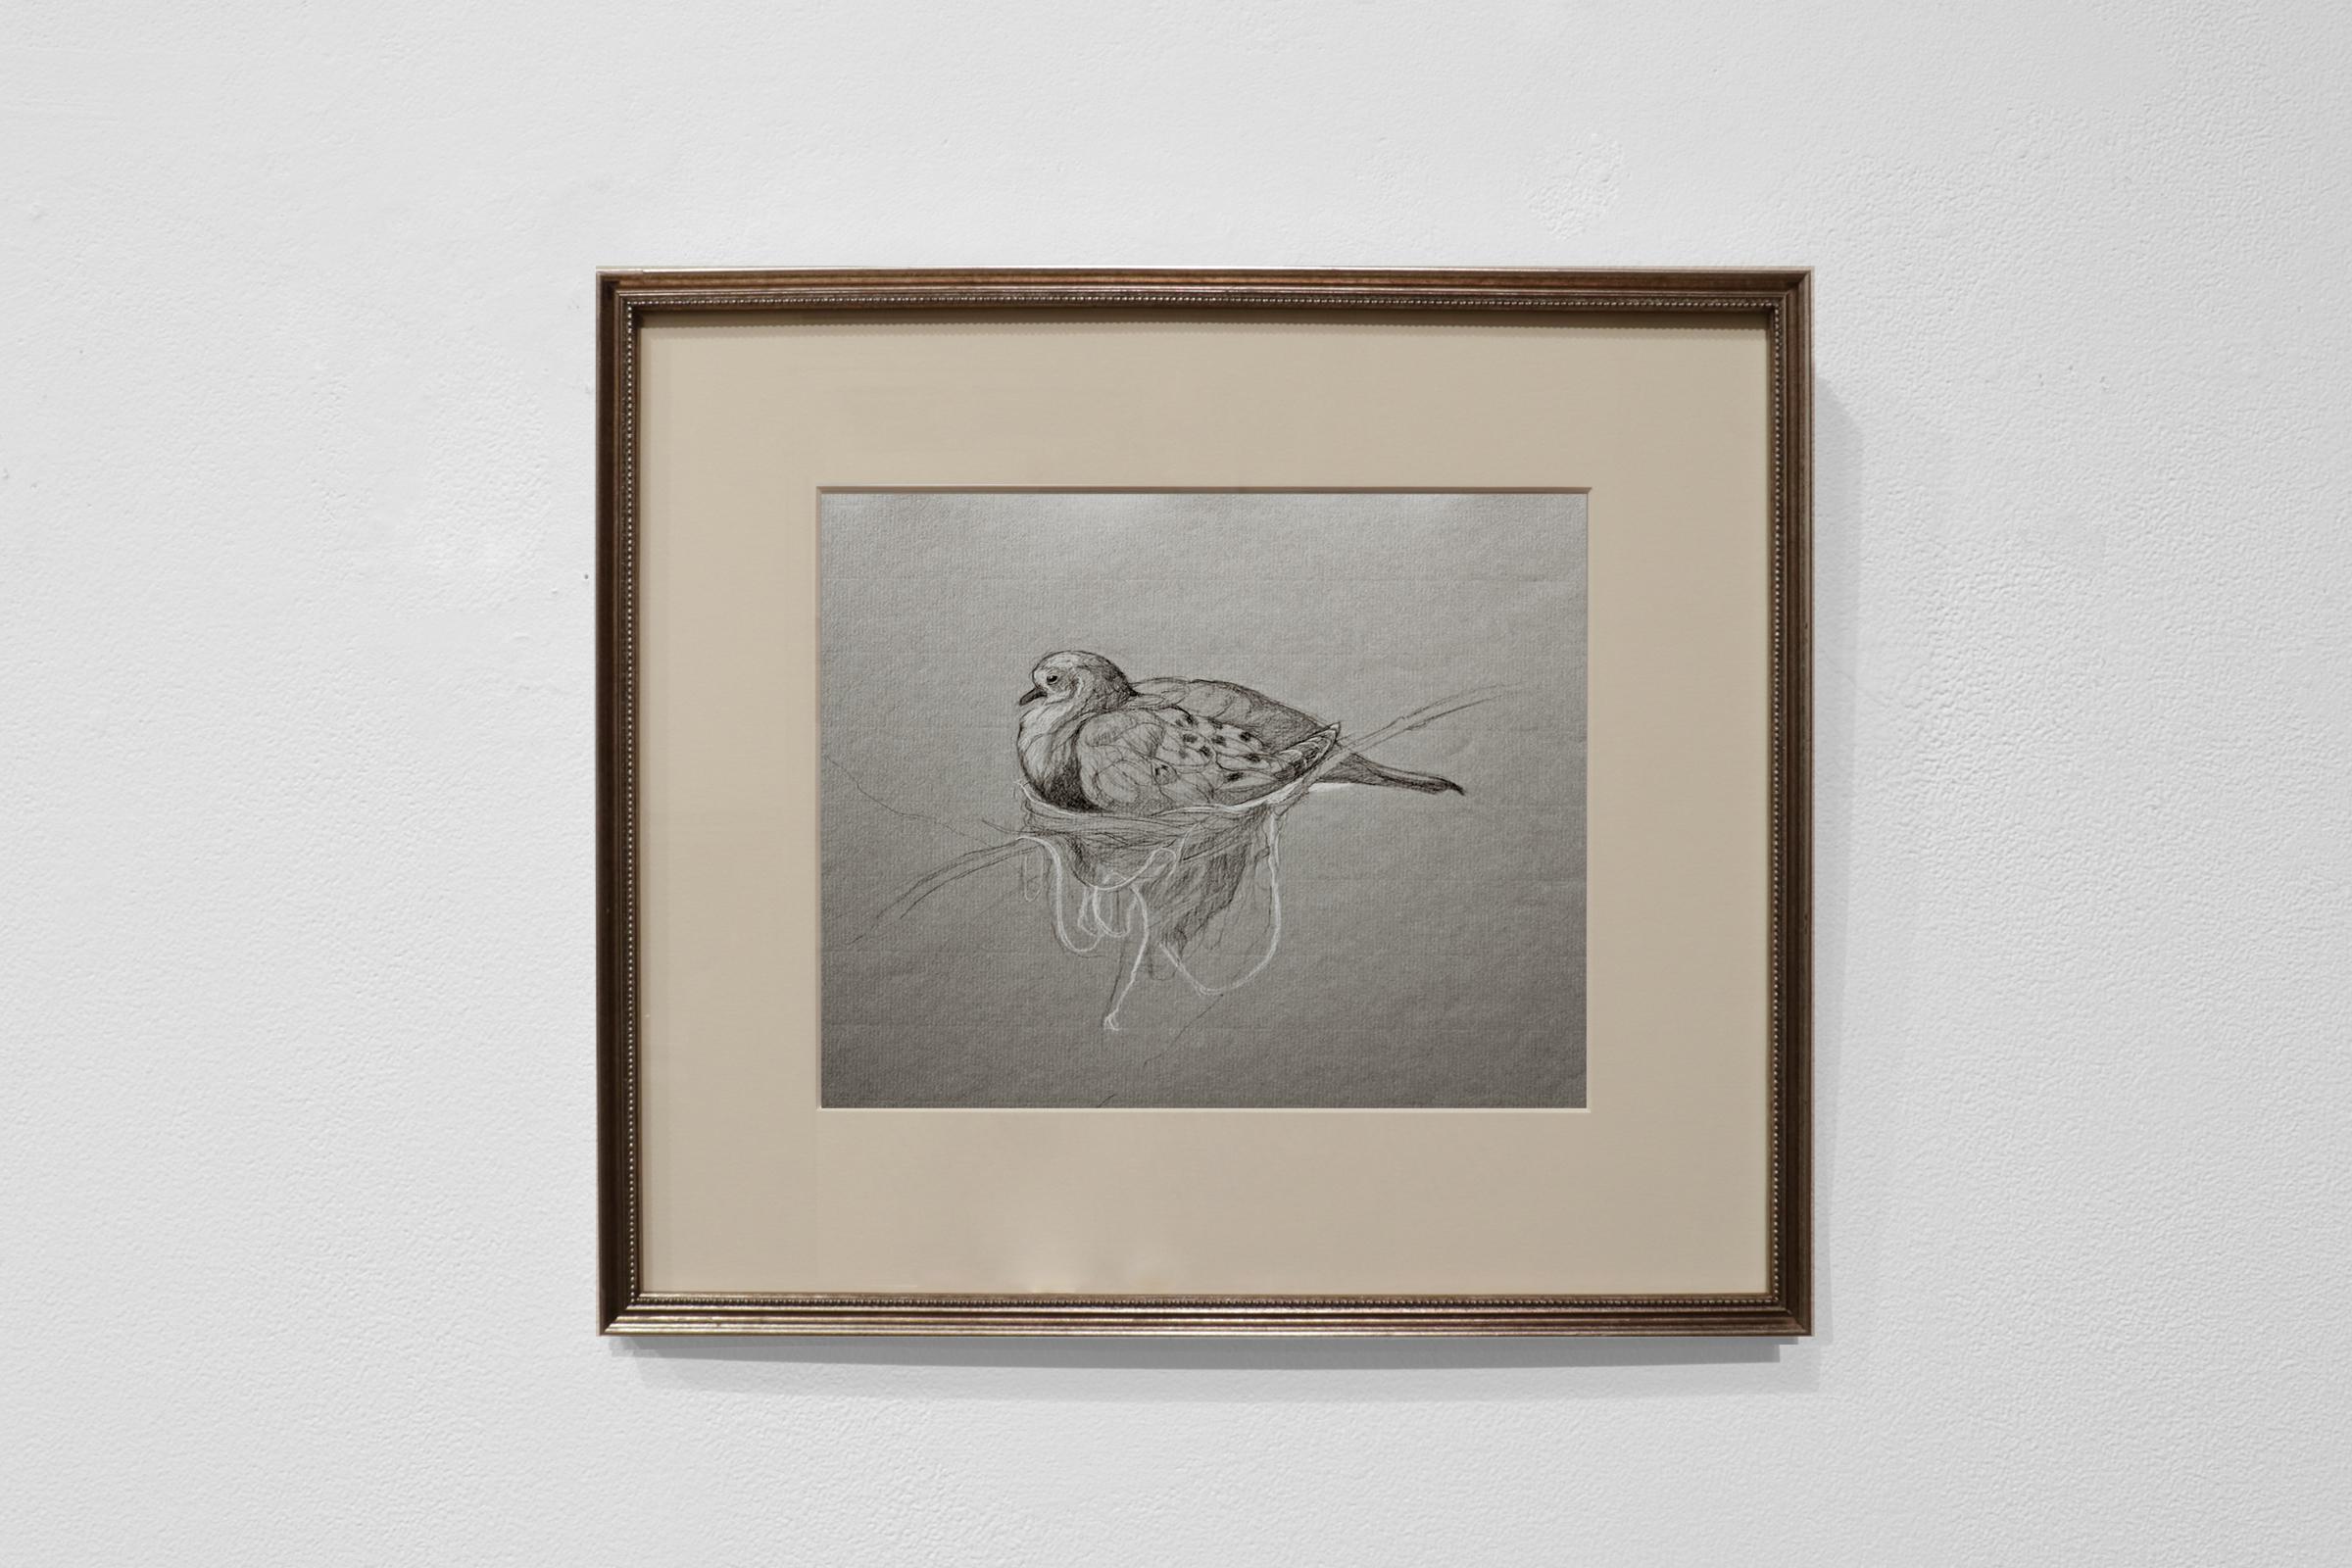 MOURNING DOVE AND NEST WITH WHITE STRING (RÉalisme / dessin au fusain / faune sauvage)